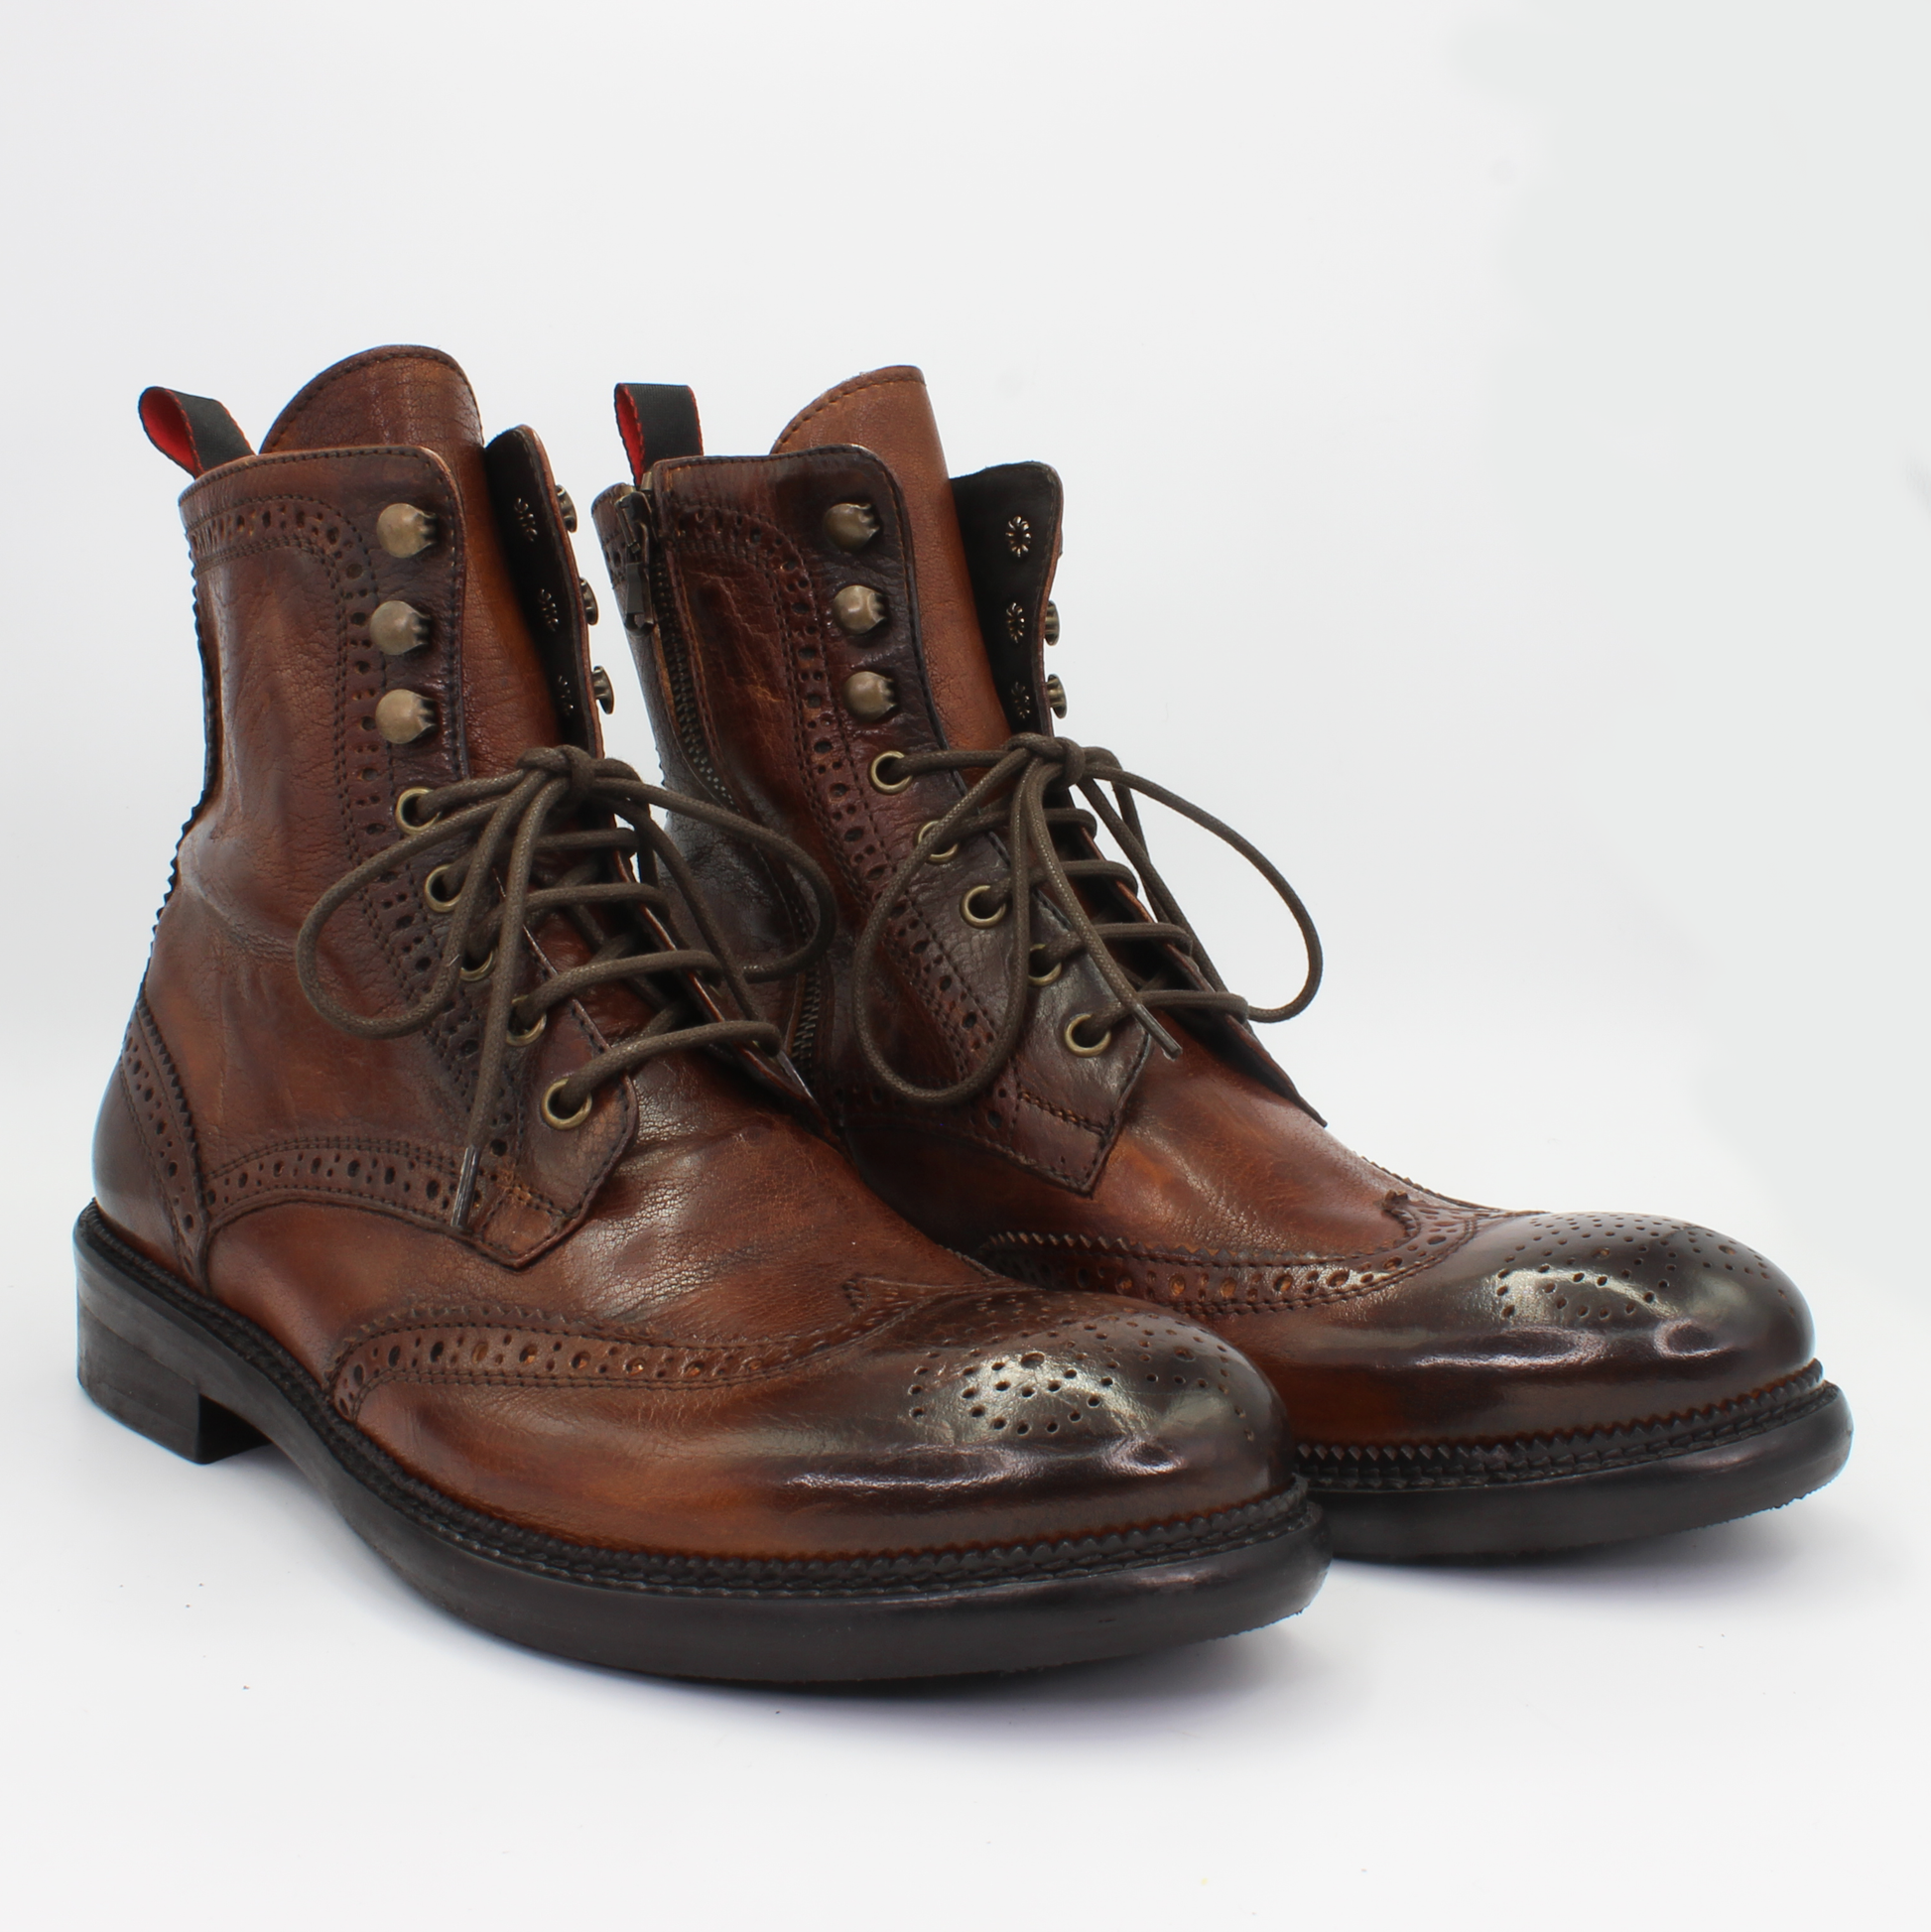 Shop Handmade Italian Leather Boot in Candy Cuoio Tan (JP37340/1) or browse our range of hand-made Italian boots for men in leather or suede in-store at Aliverti Cape Town, or shop online. We deliver in South Africa & offer multiple payment plans as well as accept multiple safe & secure payment methods.